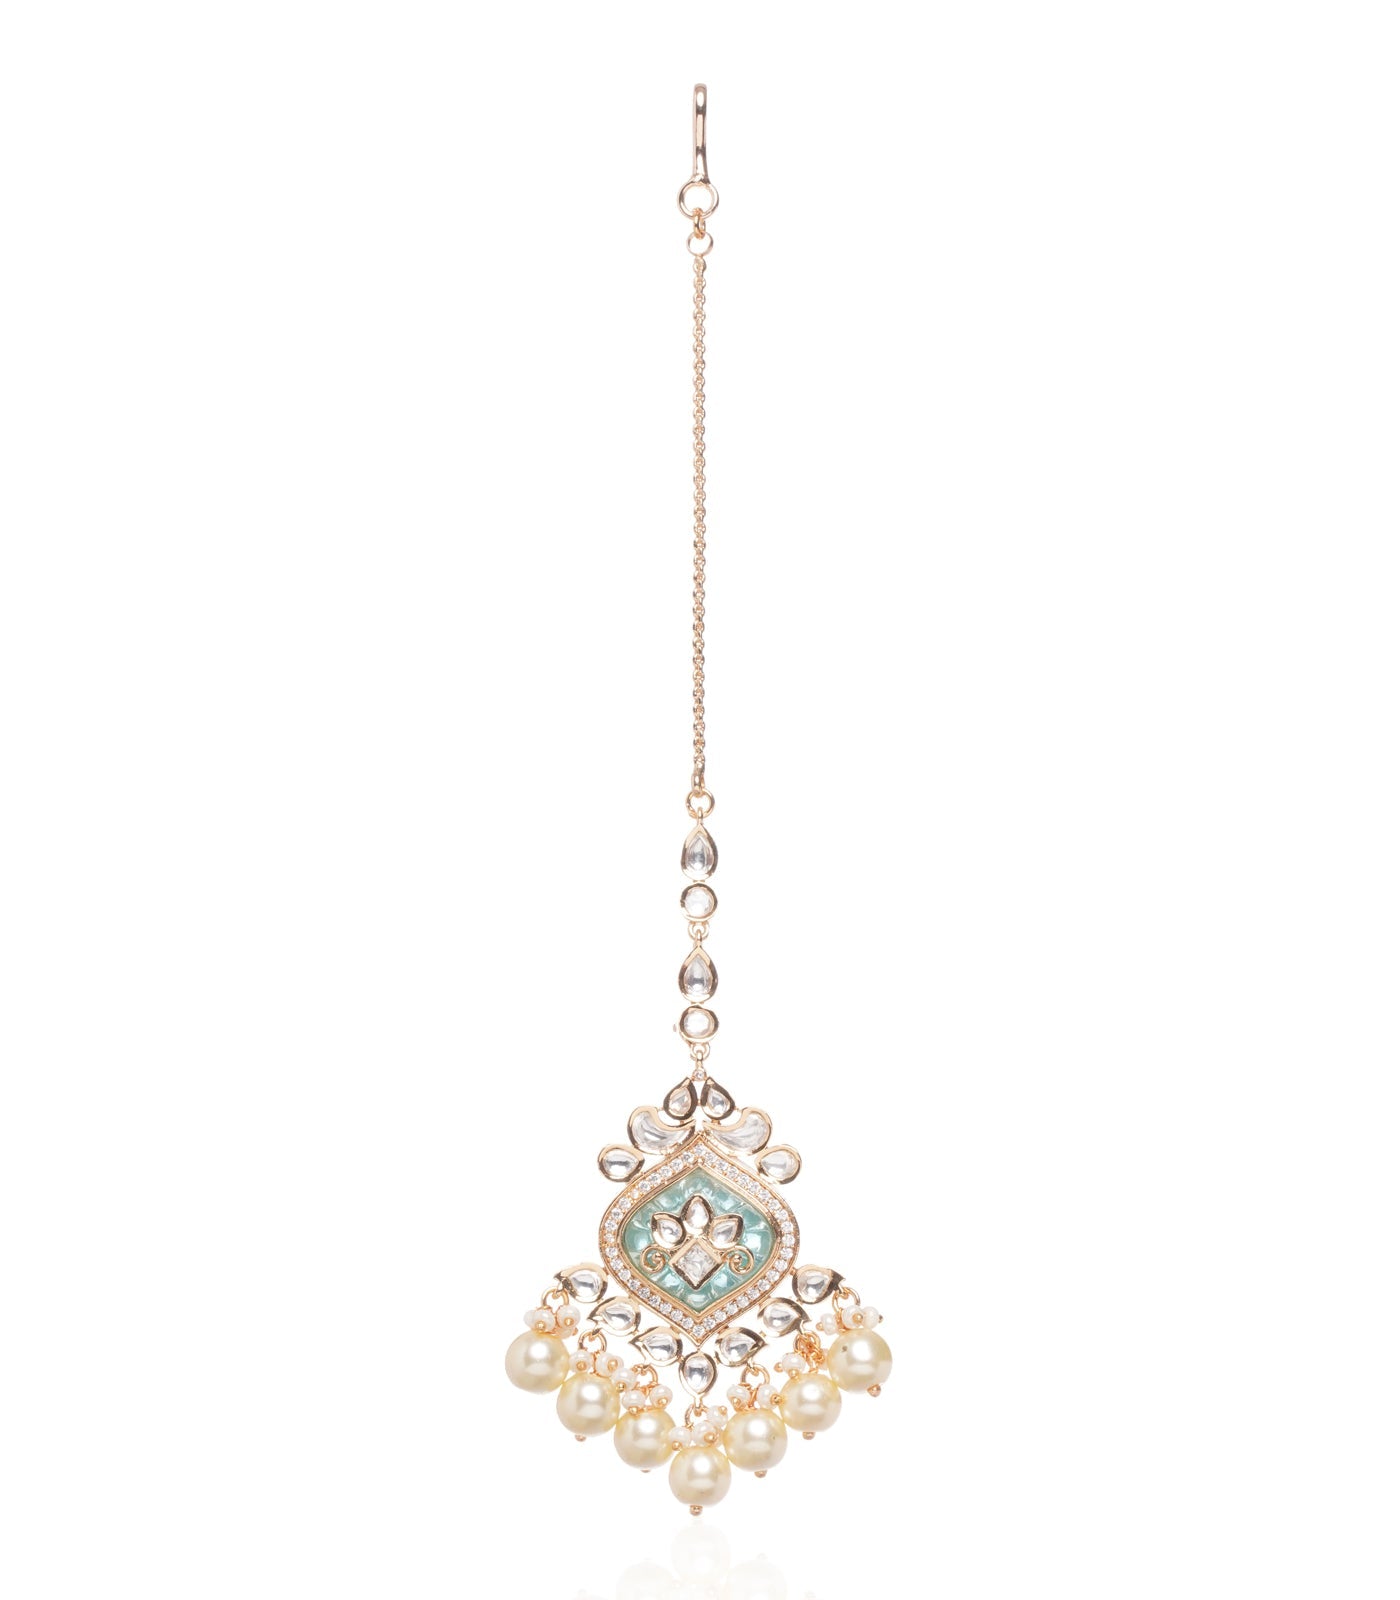 Preeti Mohan - Chandni Gold Plated Mint Kundan Choker Necklace With Pearls